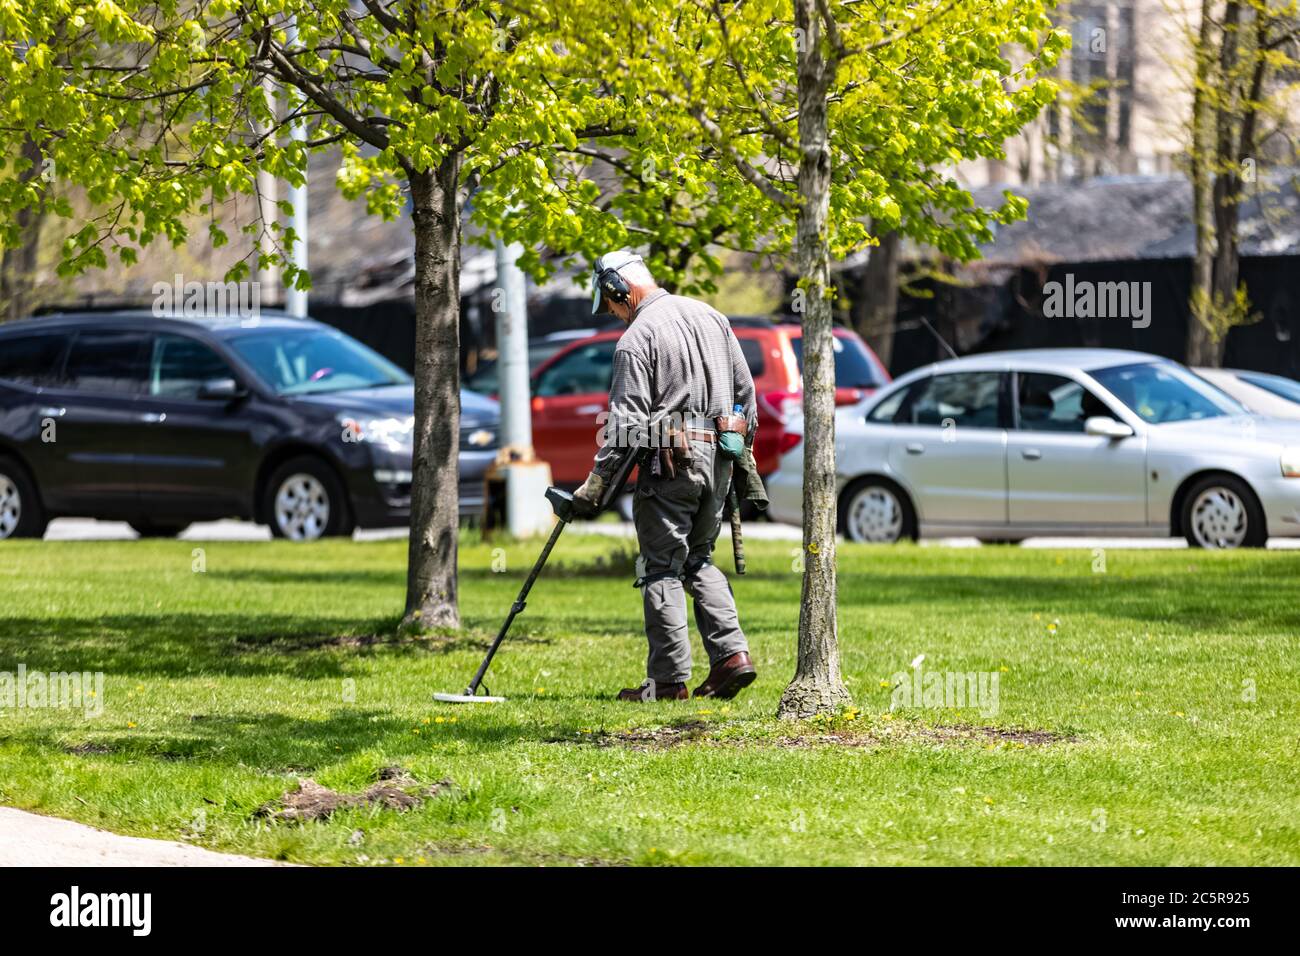 Man using a metal detector  in a park to look for items buried underground. Stock Photo